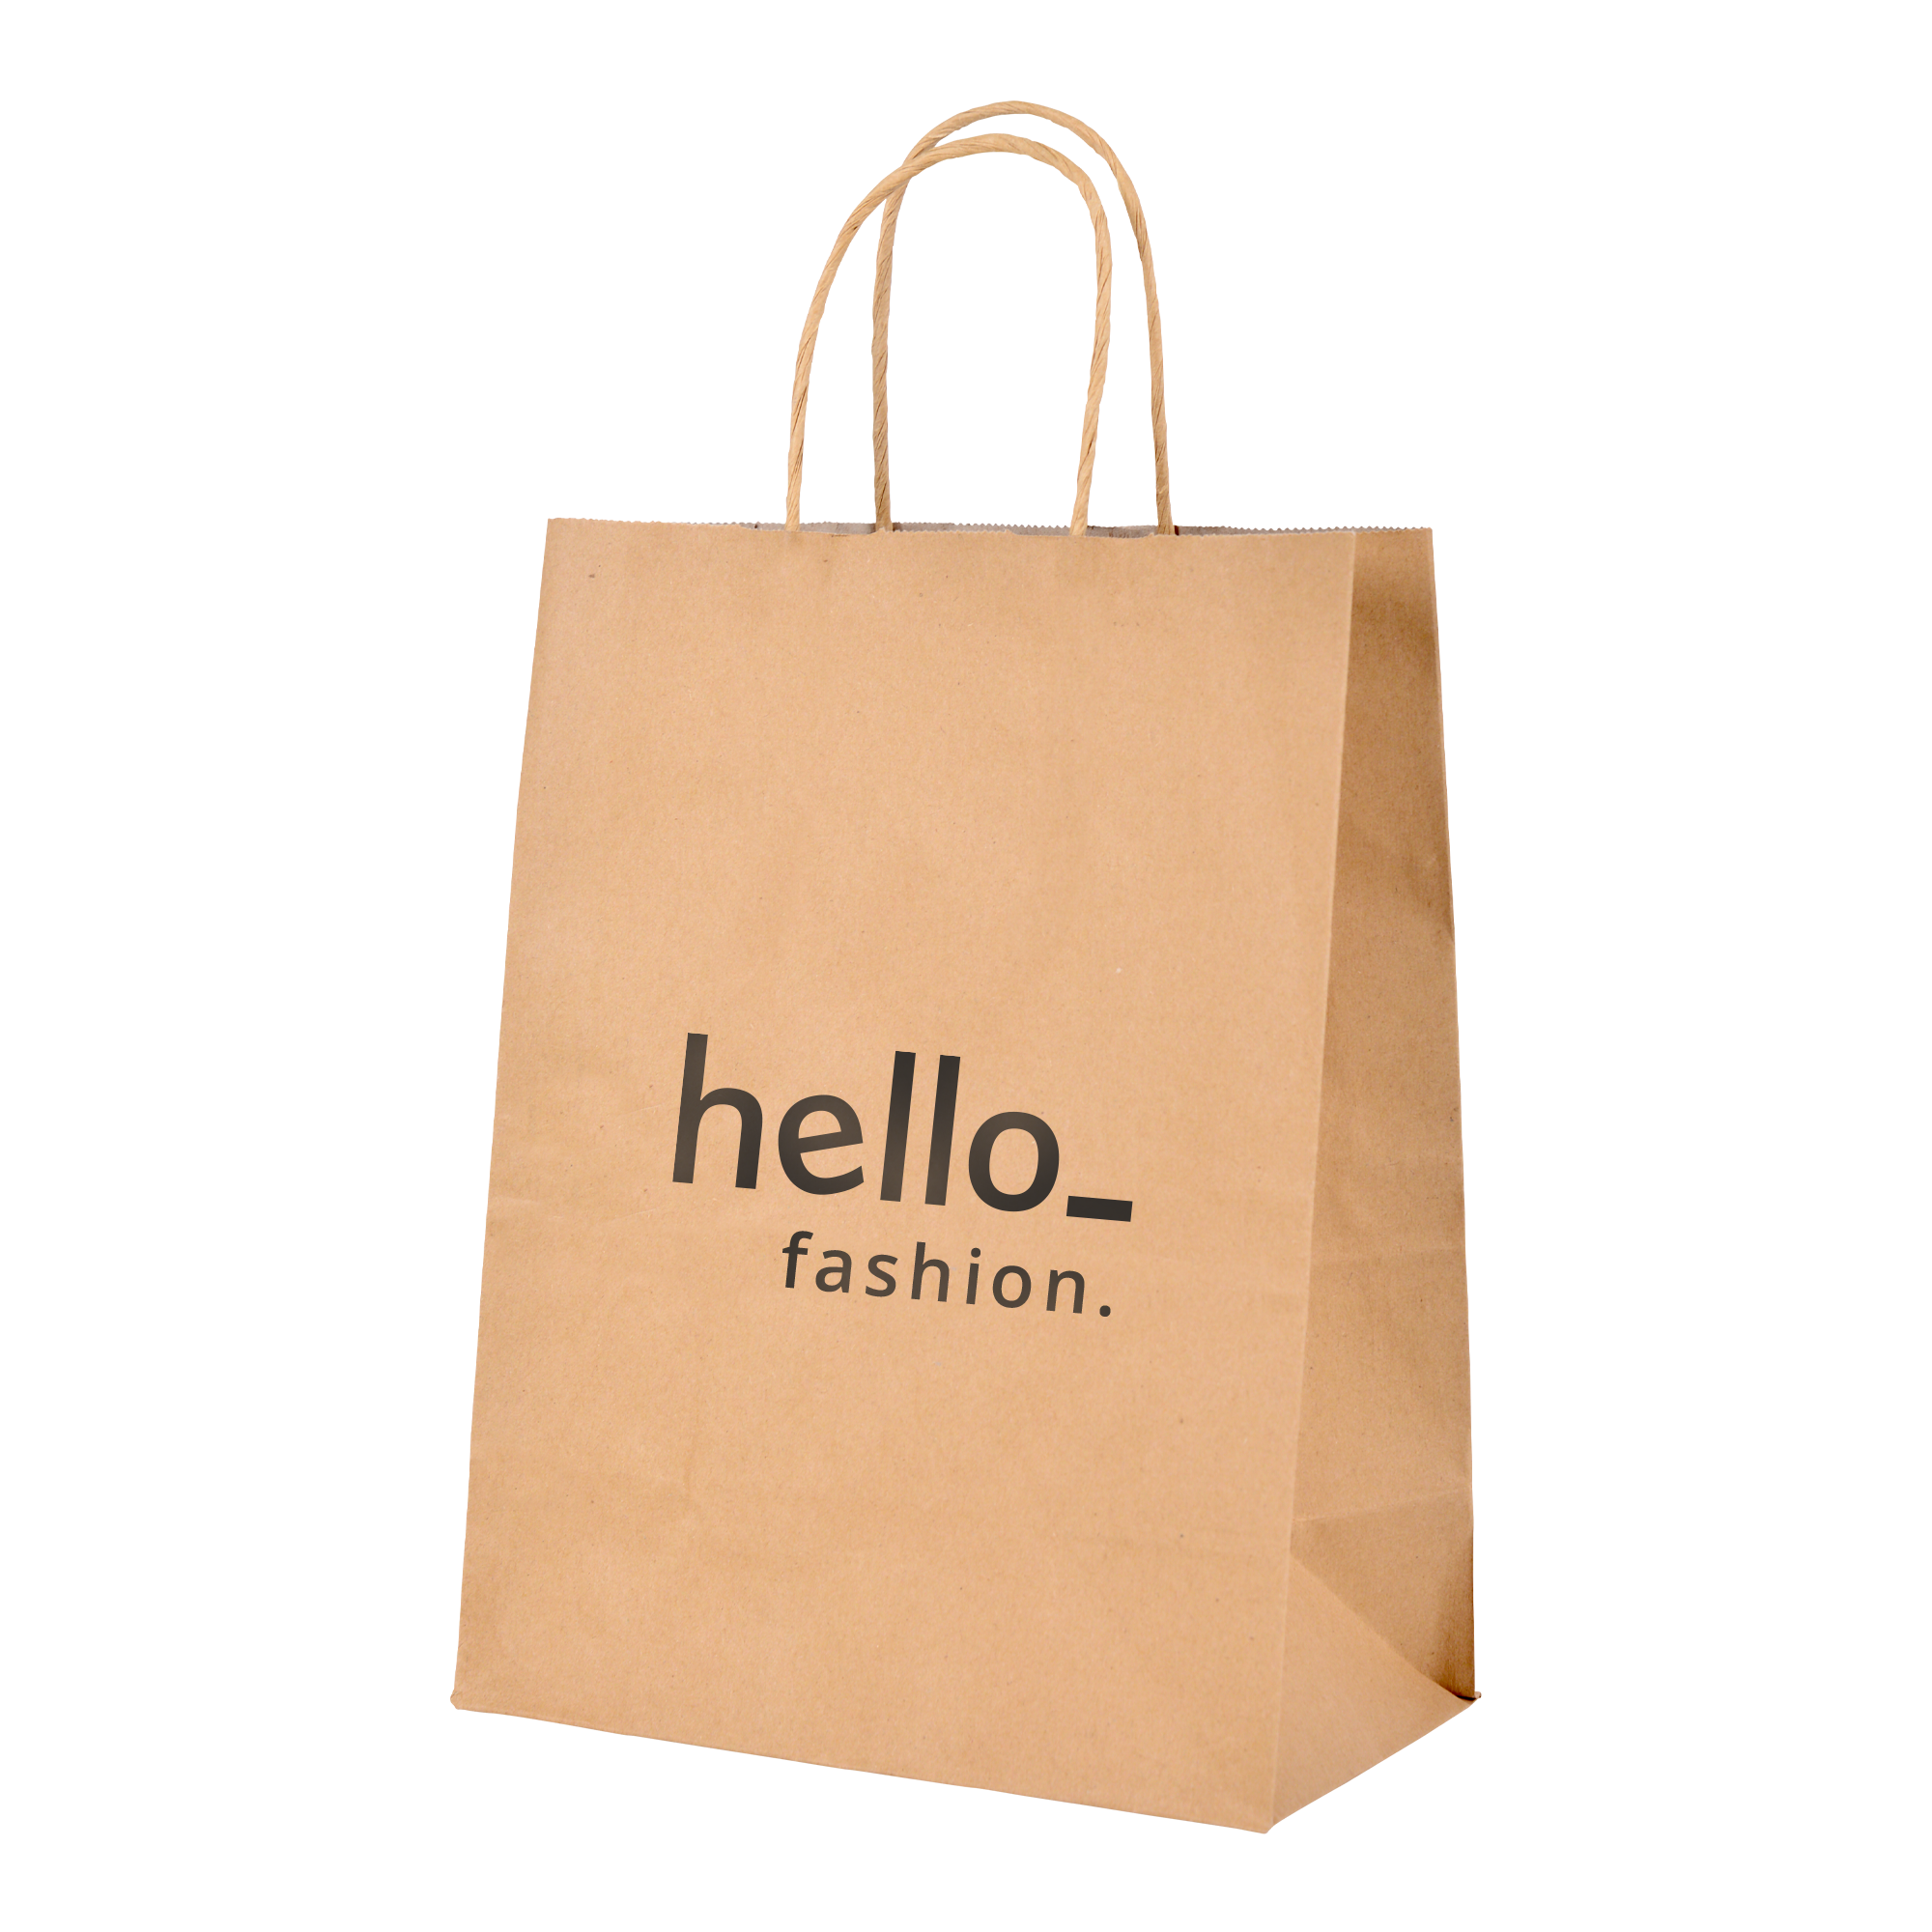 Printed Paper Bags Easy Cheap And Fast 4292